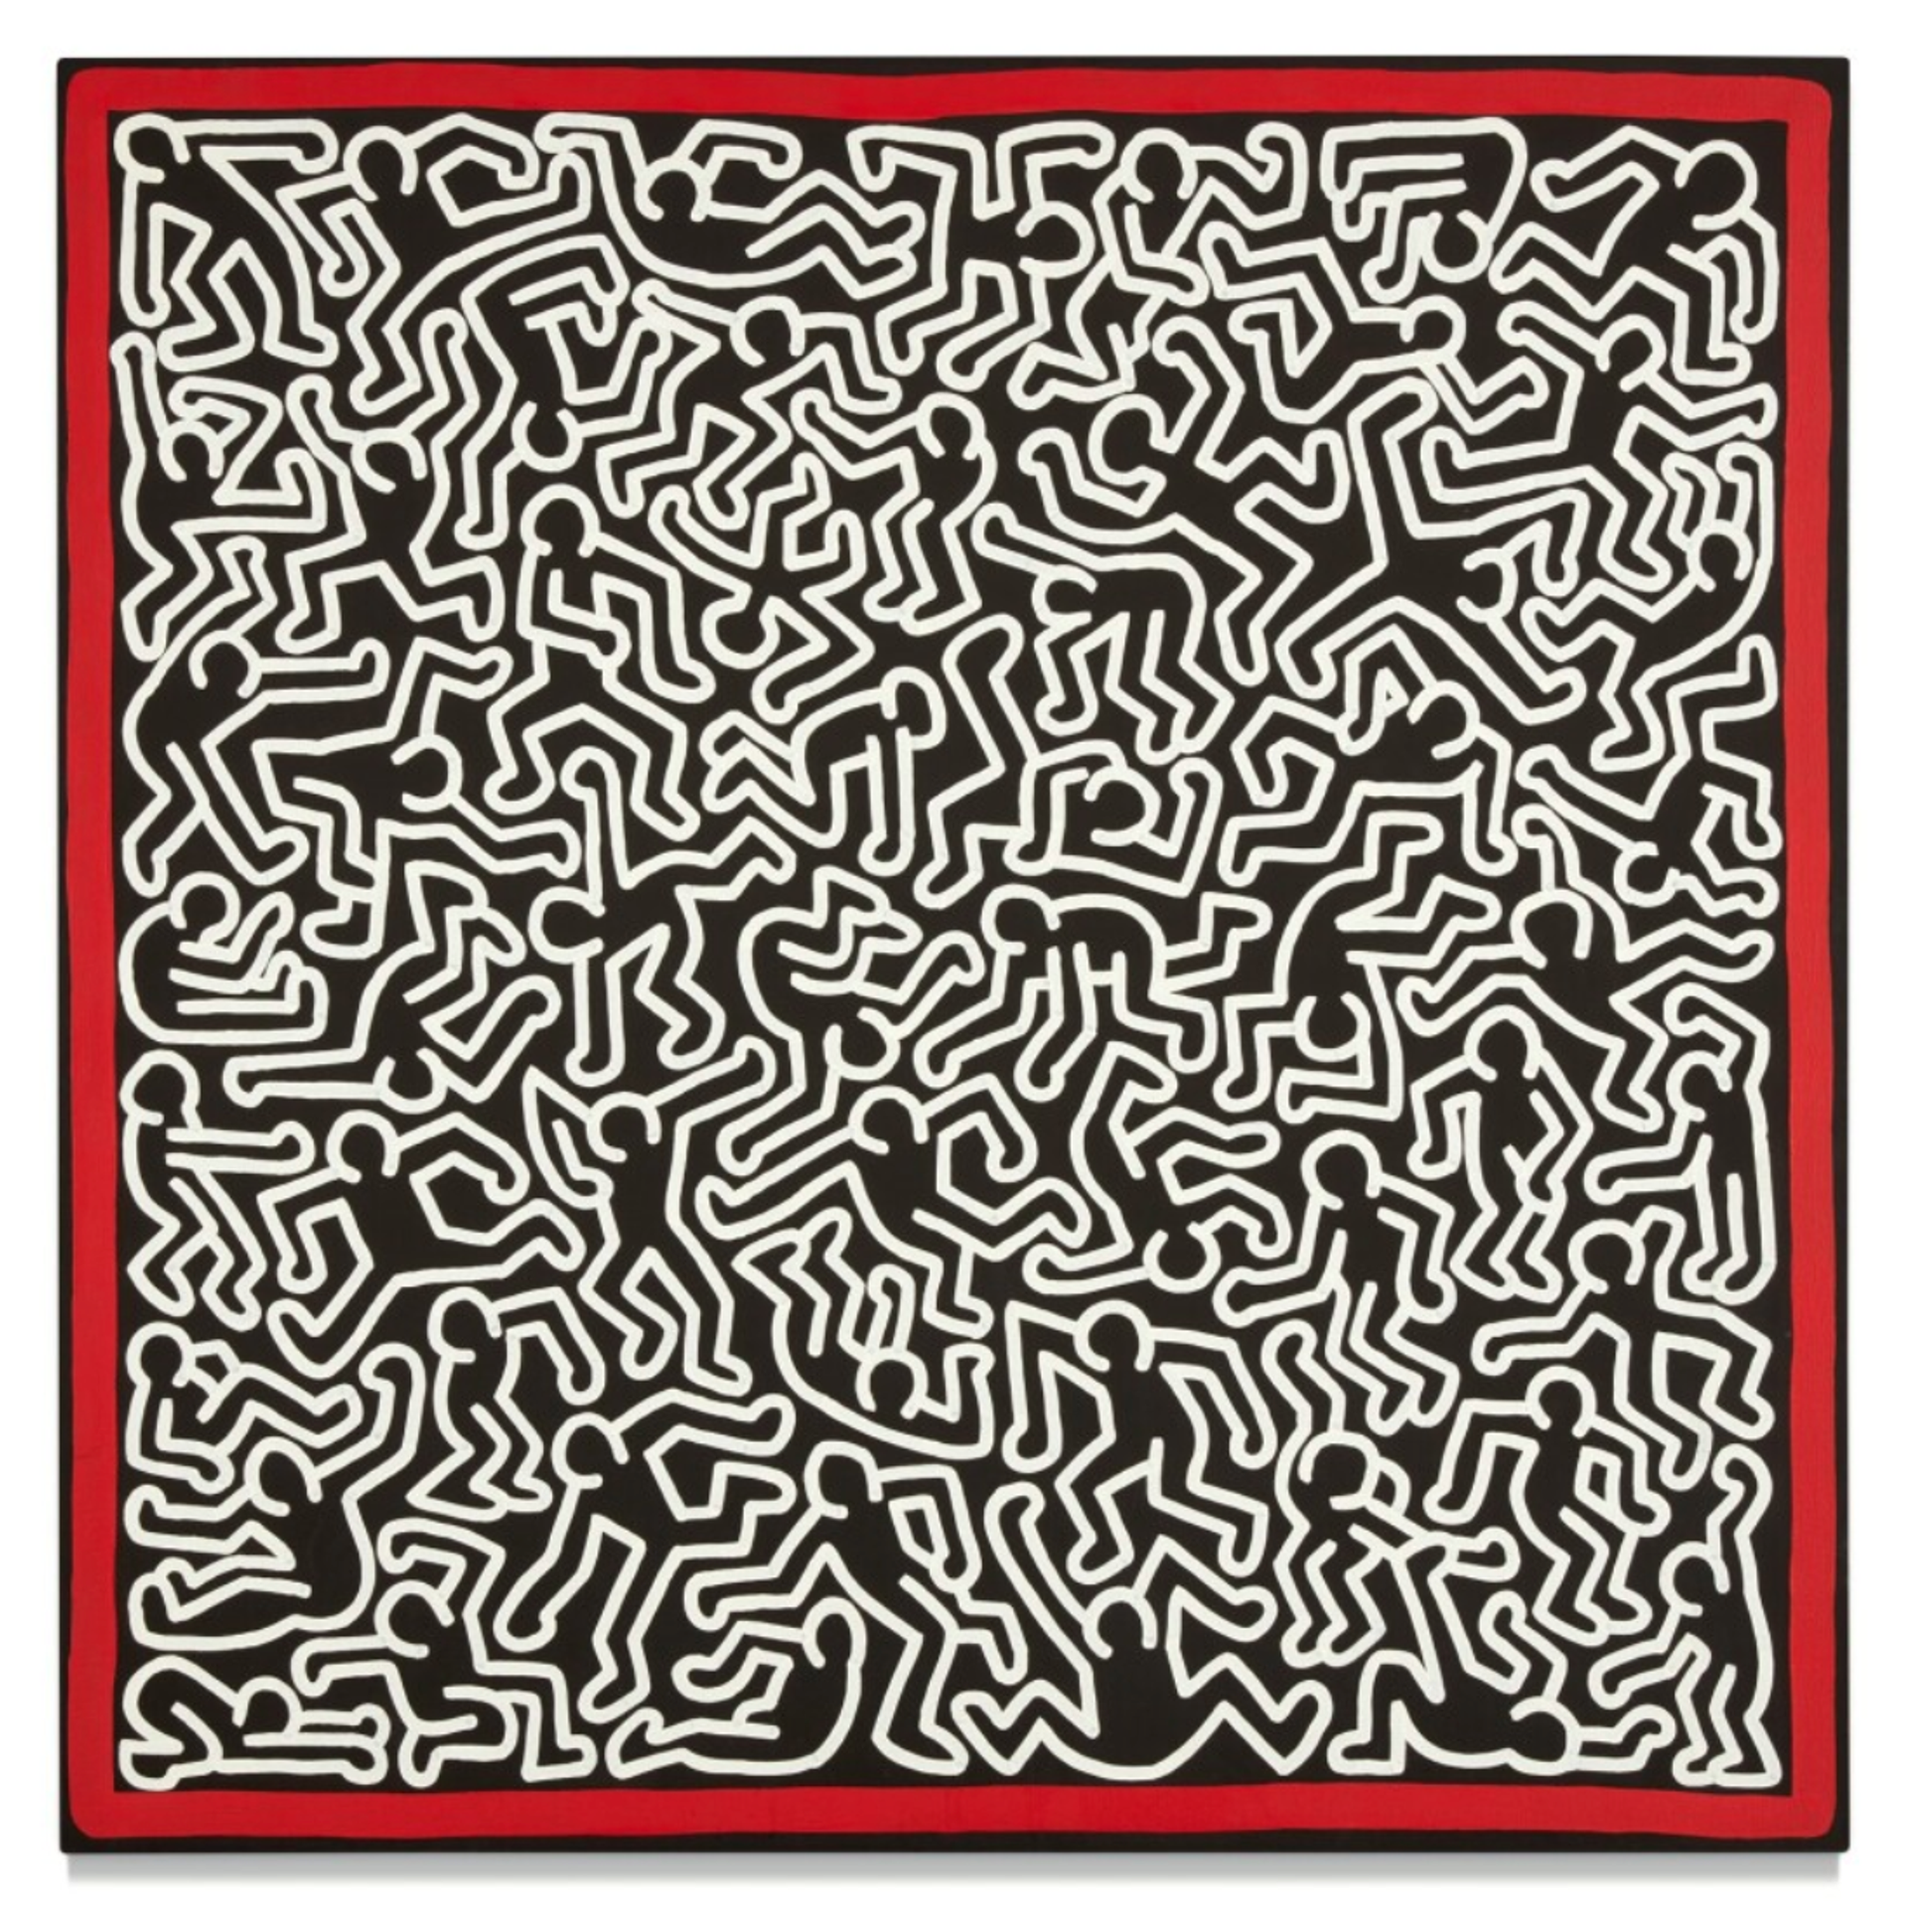 Untitled (1986) by Keith Haring